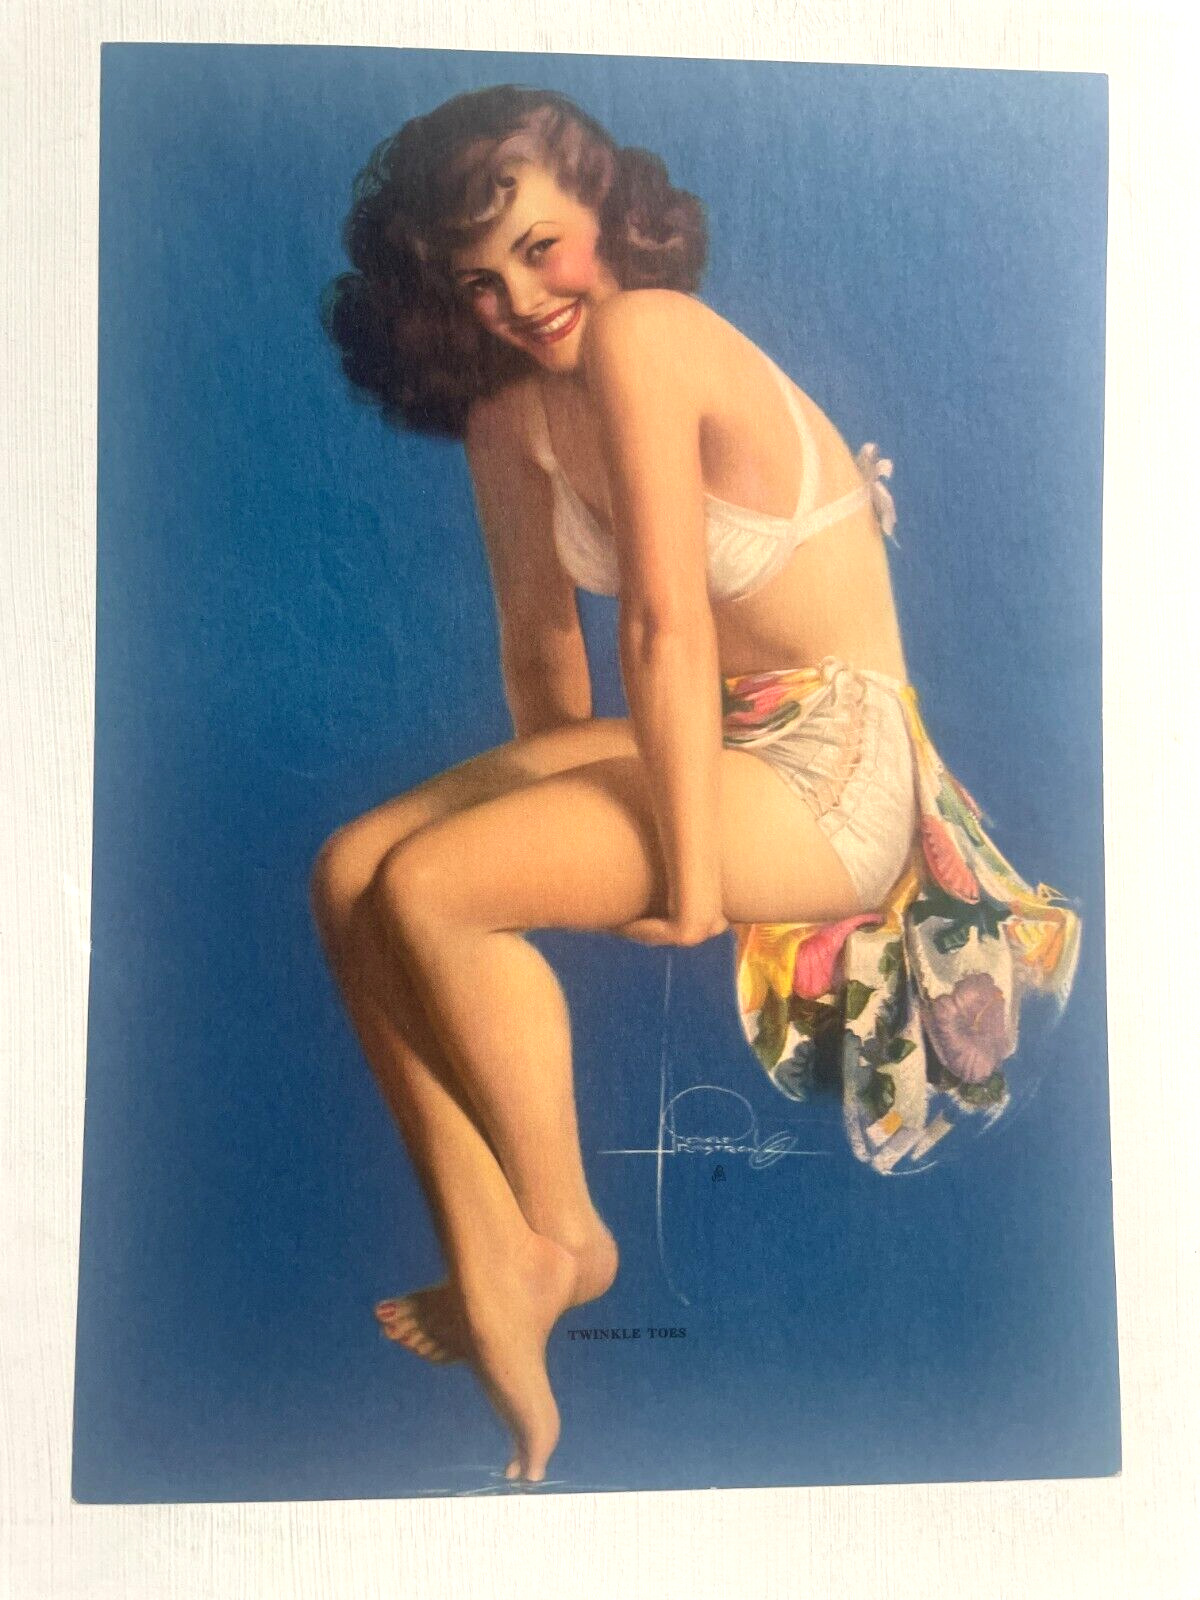 Vintage Playful Pinup Girl Picture by Rolf Armstrong- Twinkle Toes